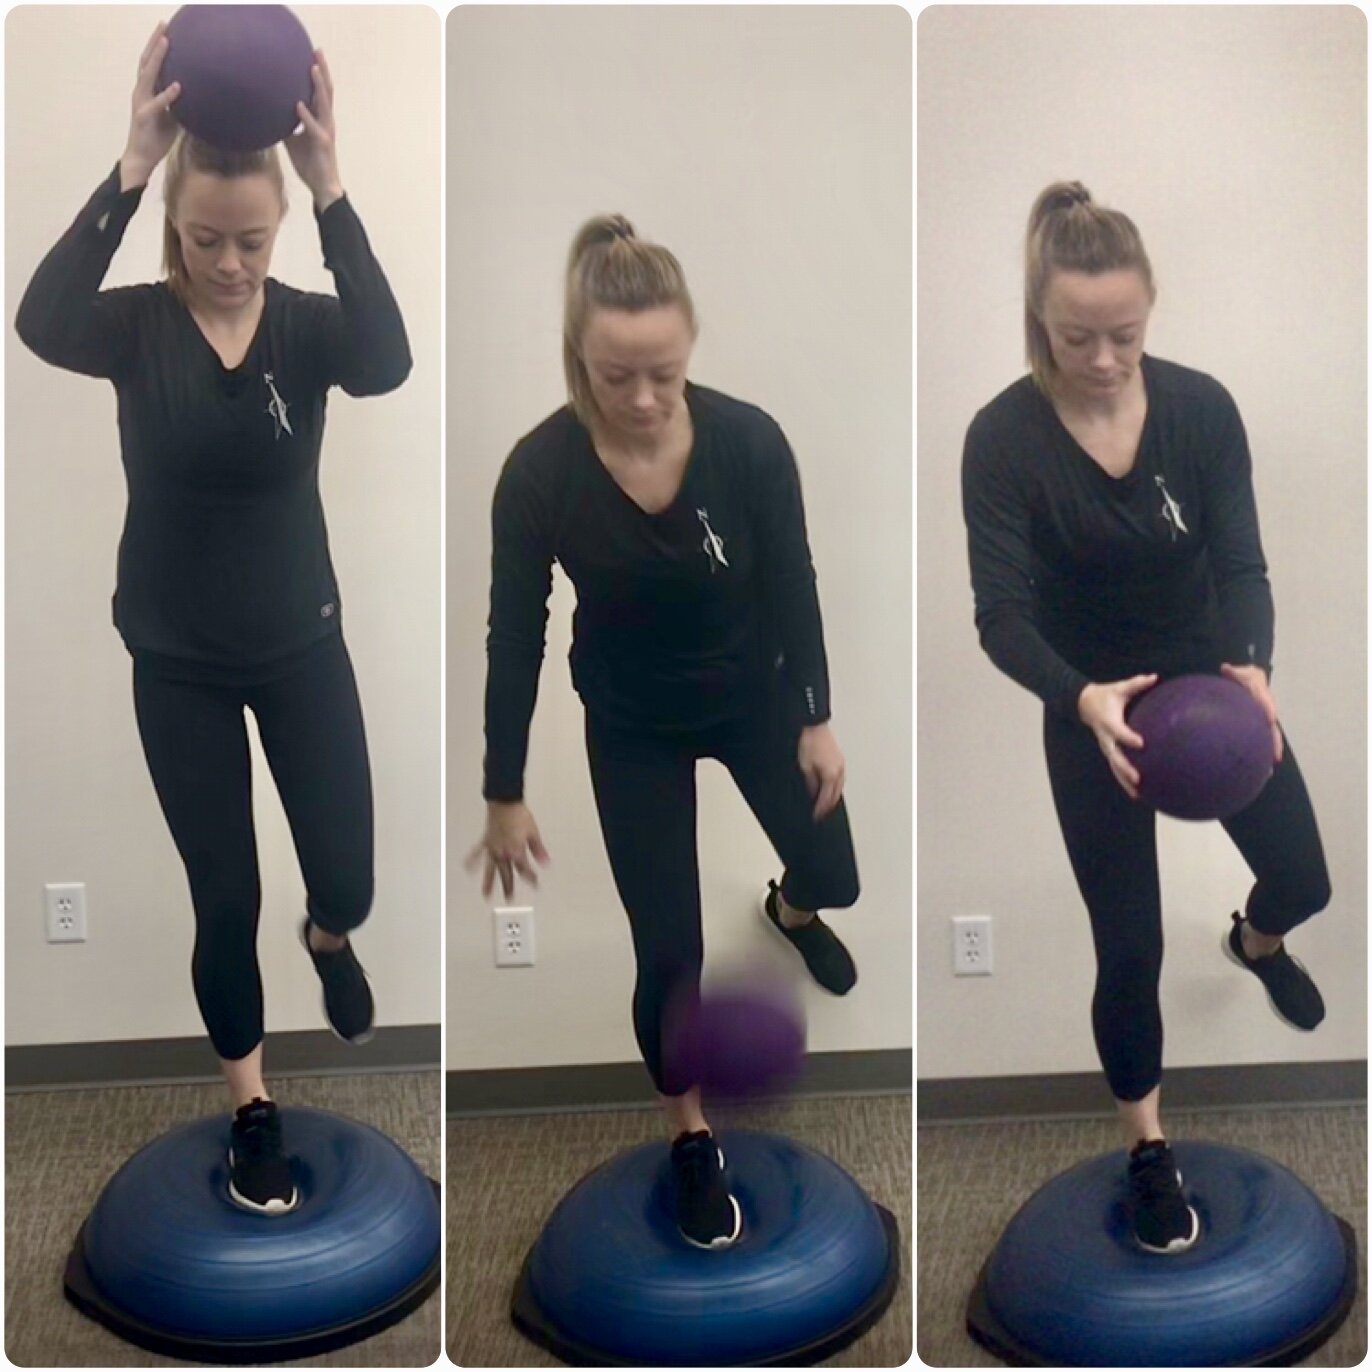 Balance on a BOSU ball or the ground on one leg. Bend your knee slightly to help stabilize. Throw your medicine ball from overhead to the ground and catch it; keeping your knee stabilized. Repeat 20 times each leg.